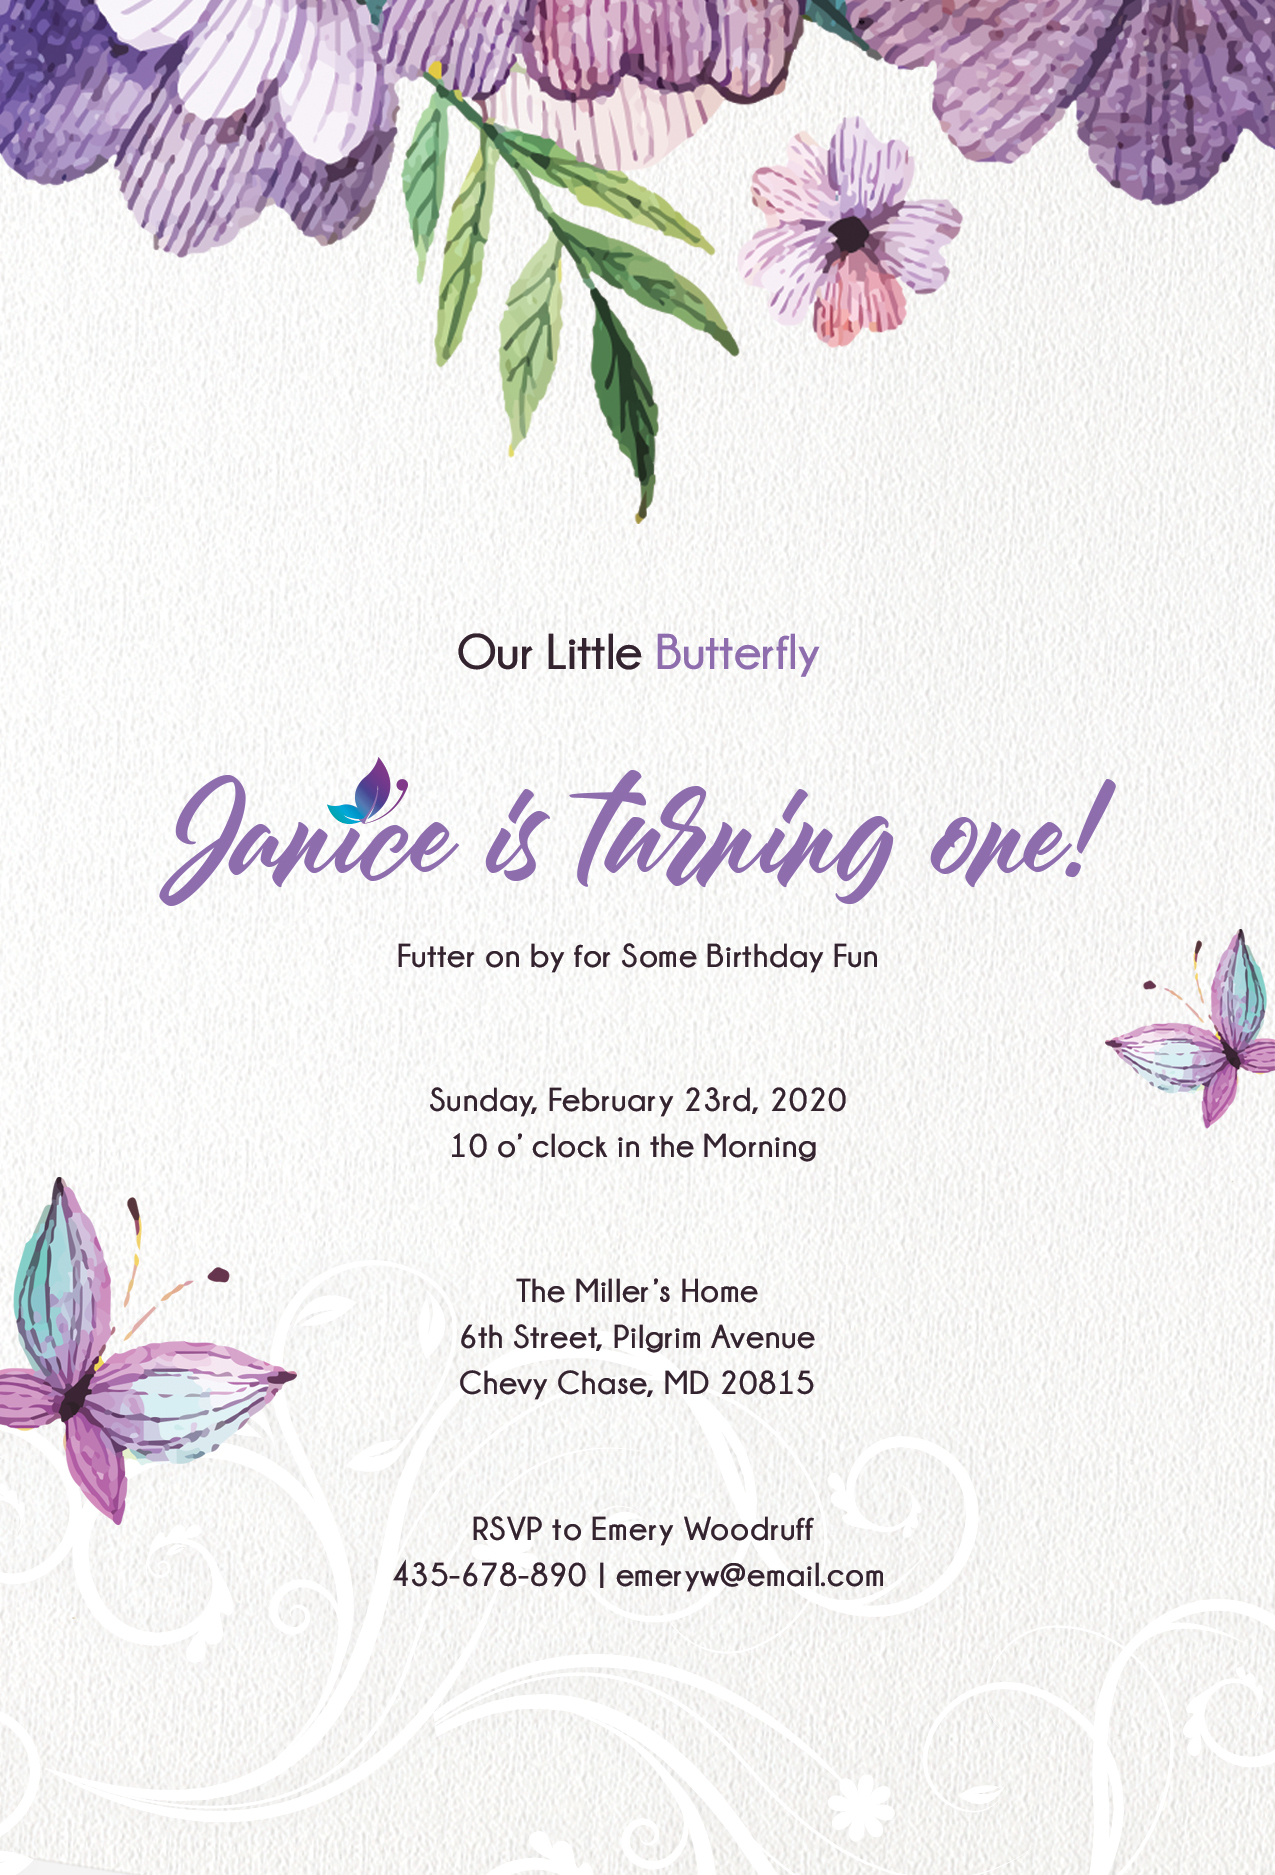 free-butterfly-invitation-template-in-psd-ms-word-publisher-illustrator-indesign-apple